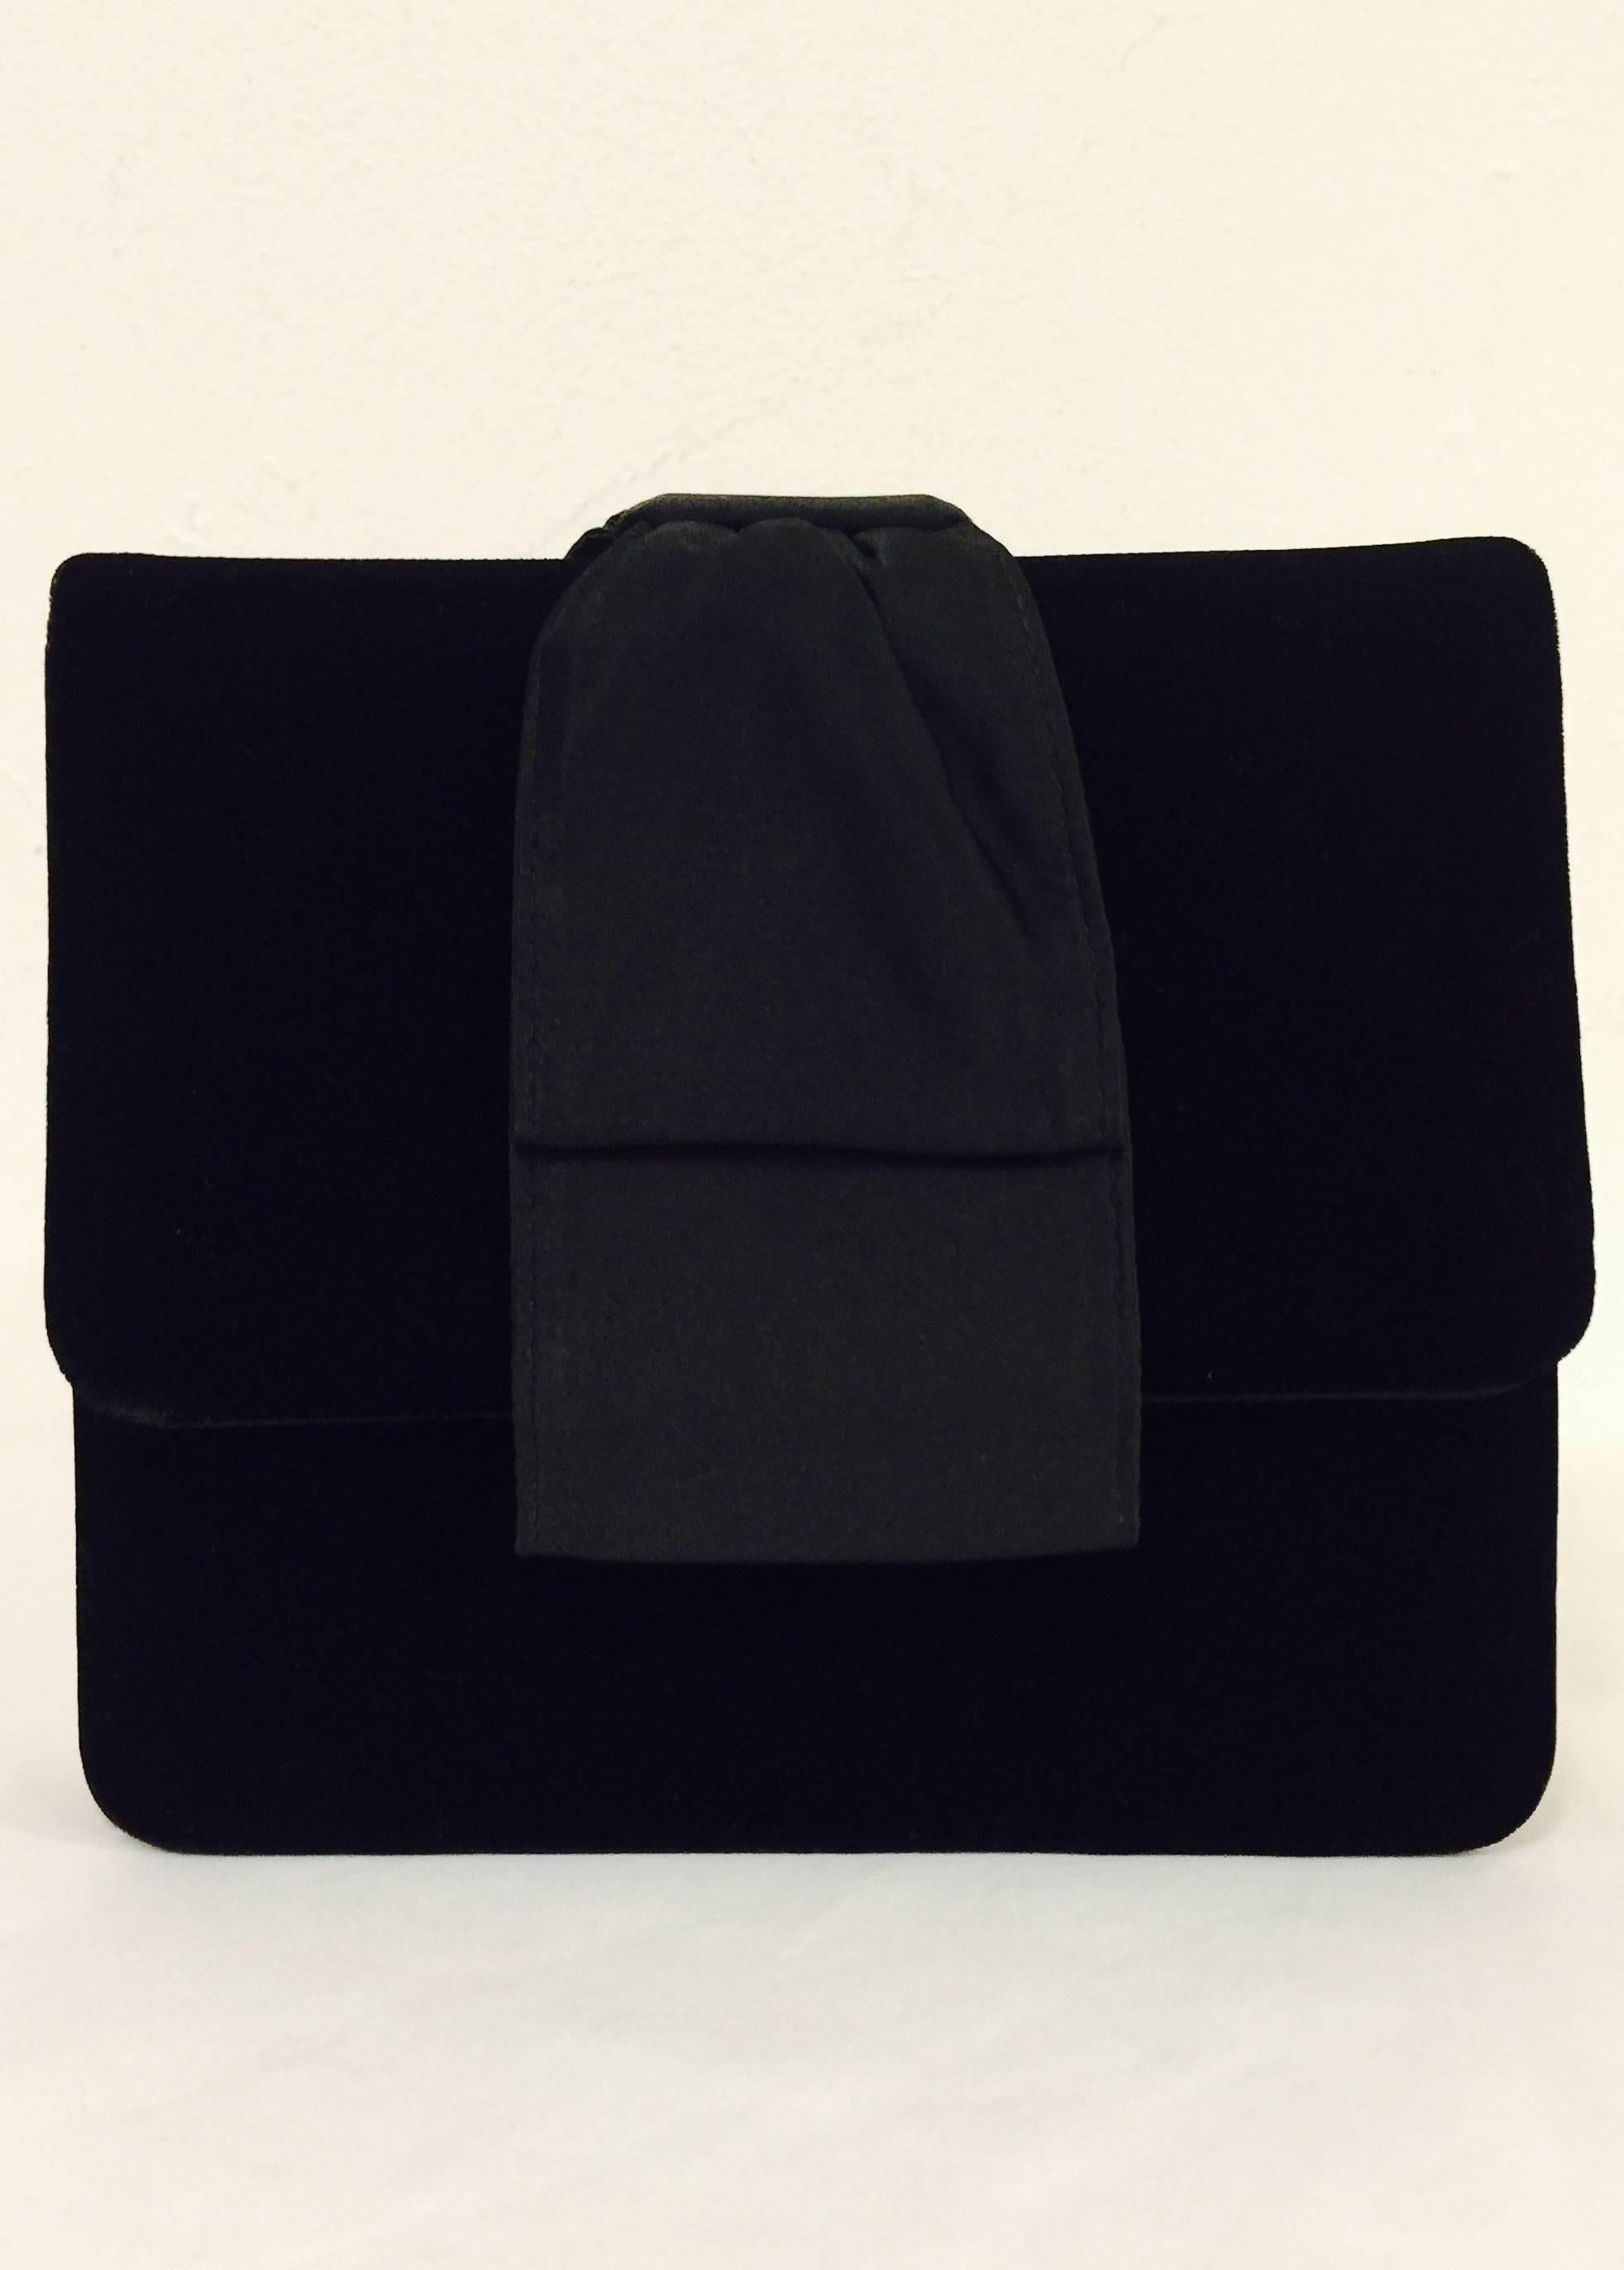 Paloma Picasso is so much more than her collaboration with Tiffany & Co.!  Black Velvet Convertible Evening bag is an ageless and timeless classic envelope clutch.  Features single gusset design, flap front, snap closure and ravishing red satin